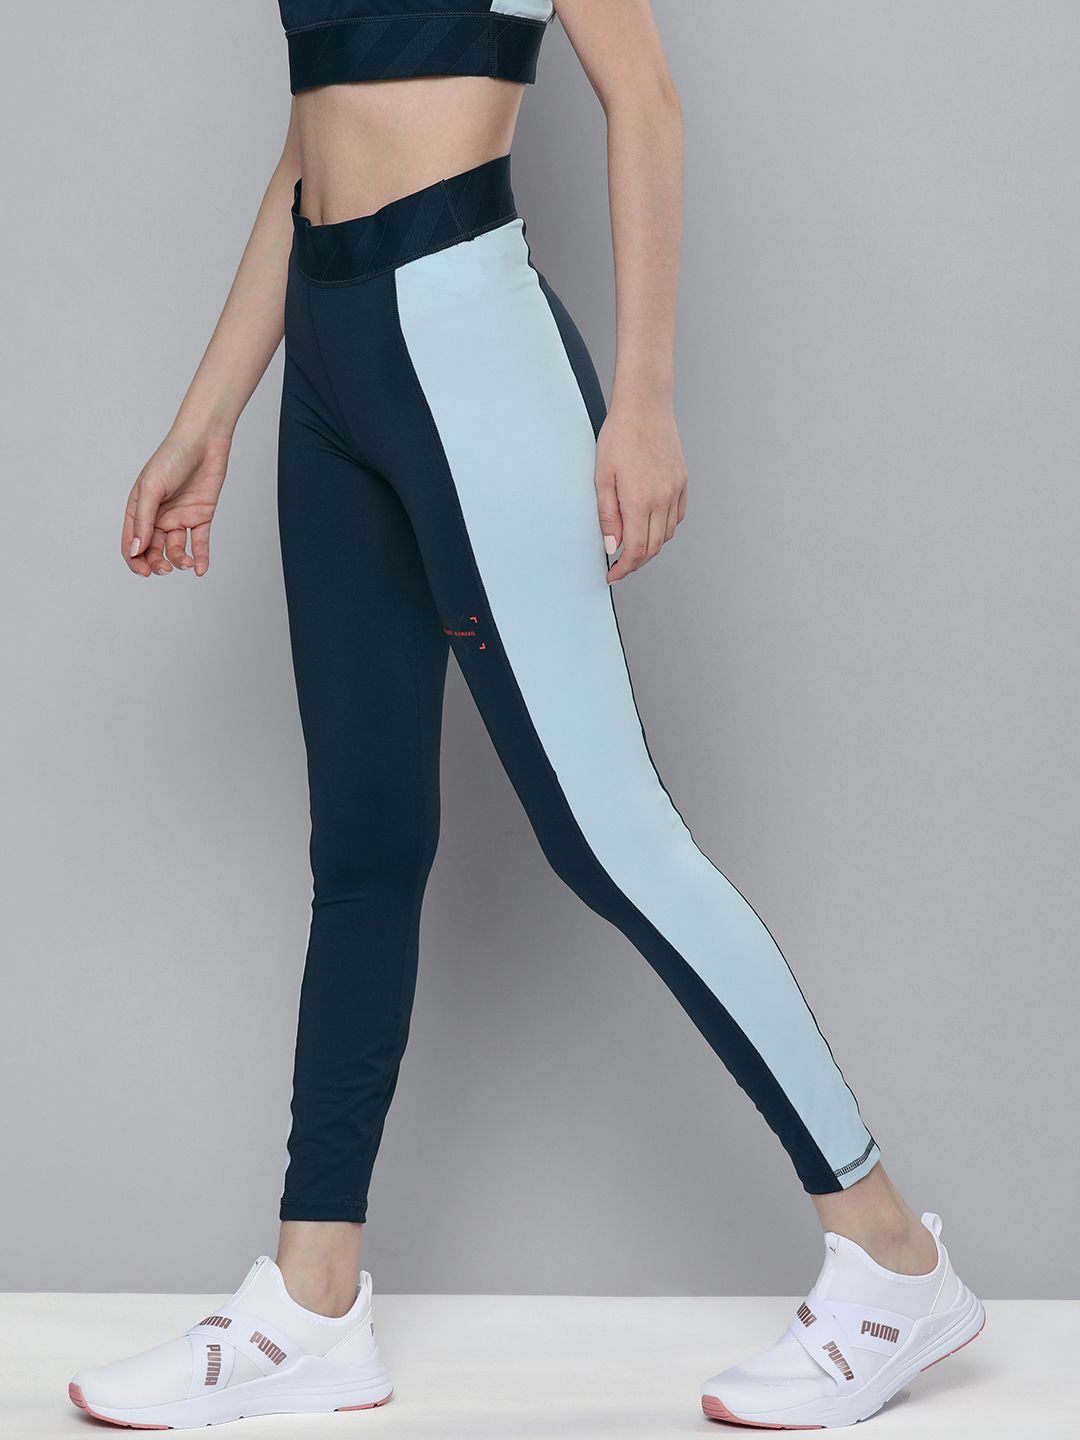 Puma Women Navy-Blue And Aqua-Blue High-Rise Colourblocked Tights Price in India